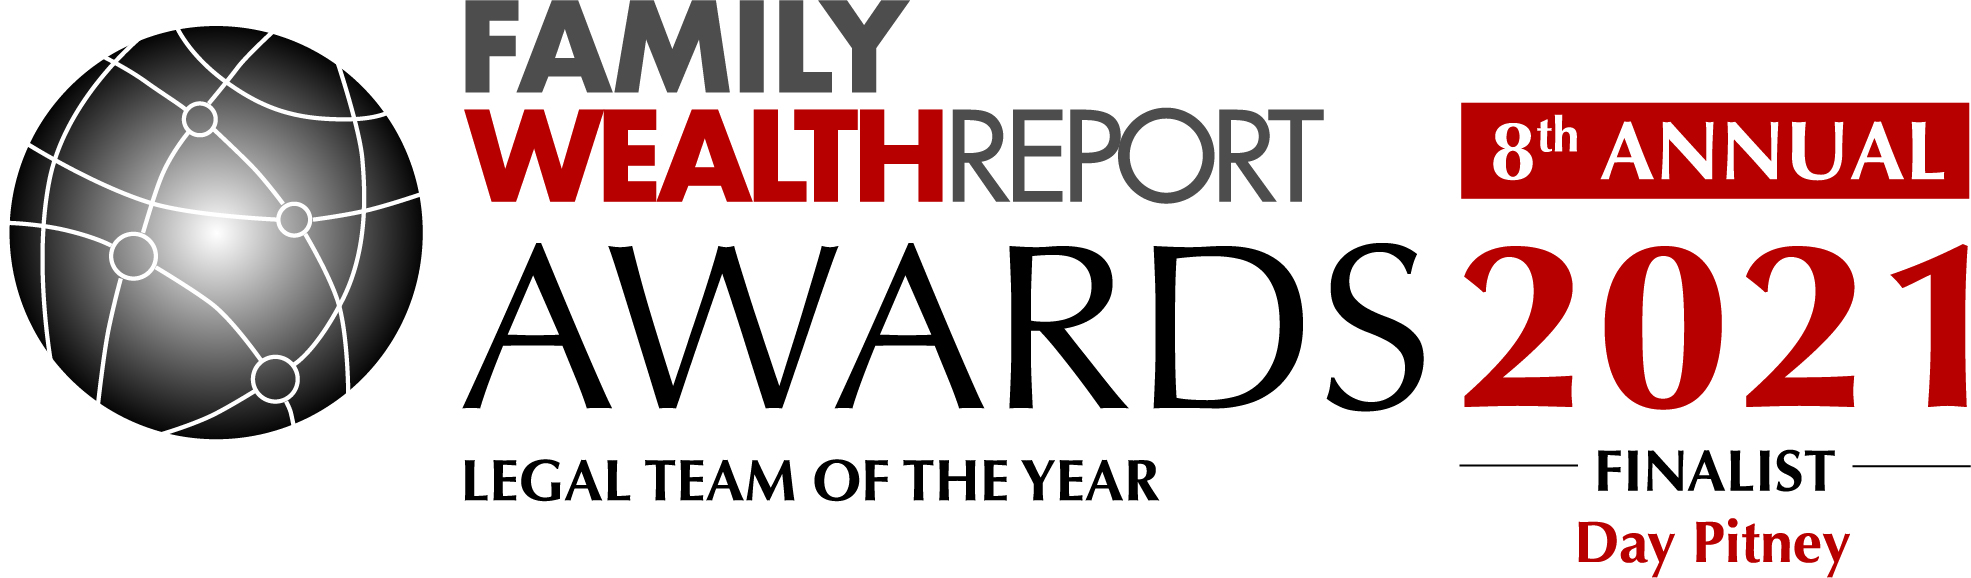 Family Wealth Report Awards 2021